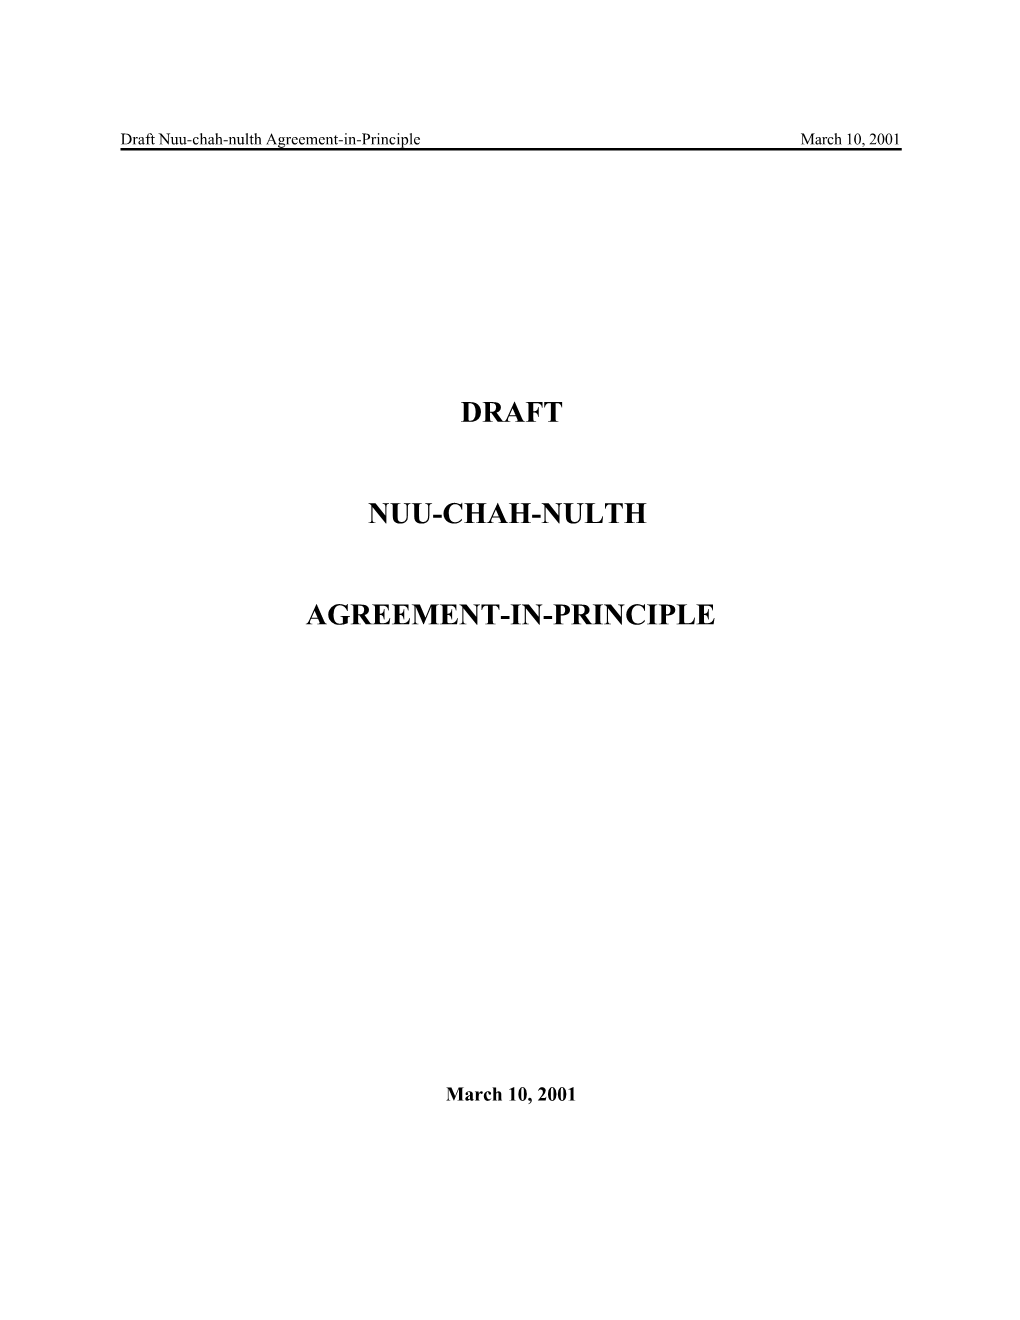 Draft Nuu-Chah-Nulth Agreement-In-Principle March 10, 2001